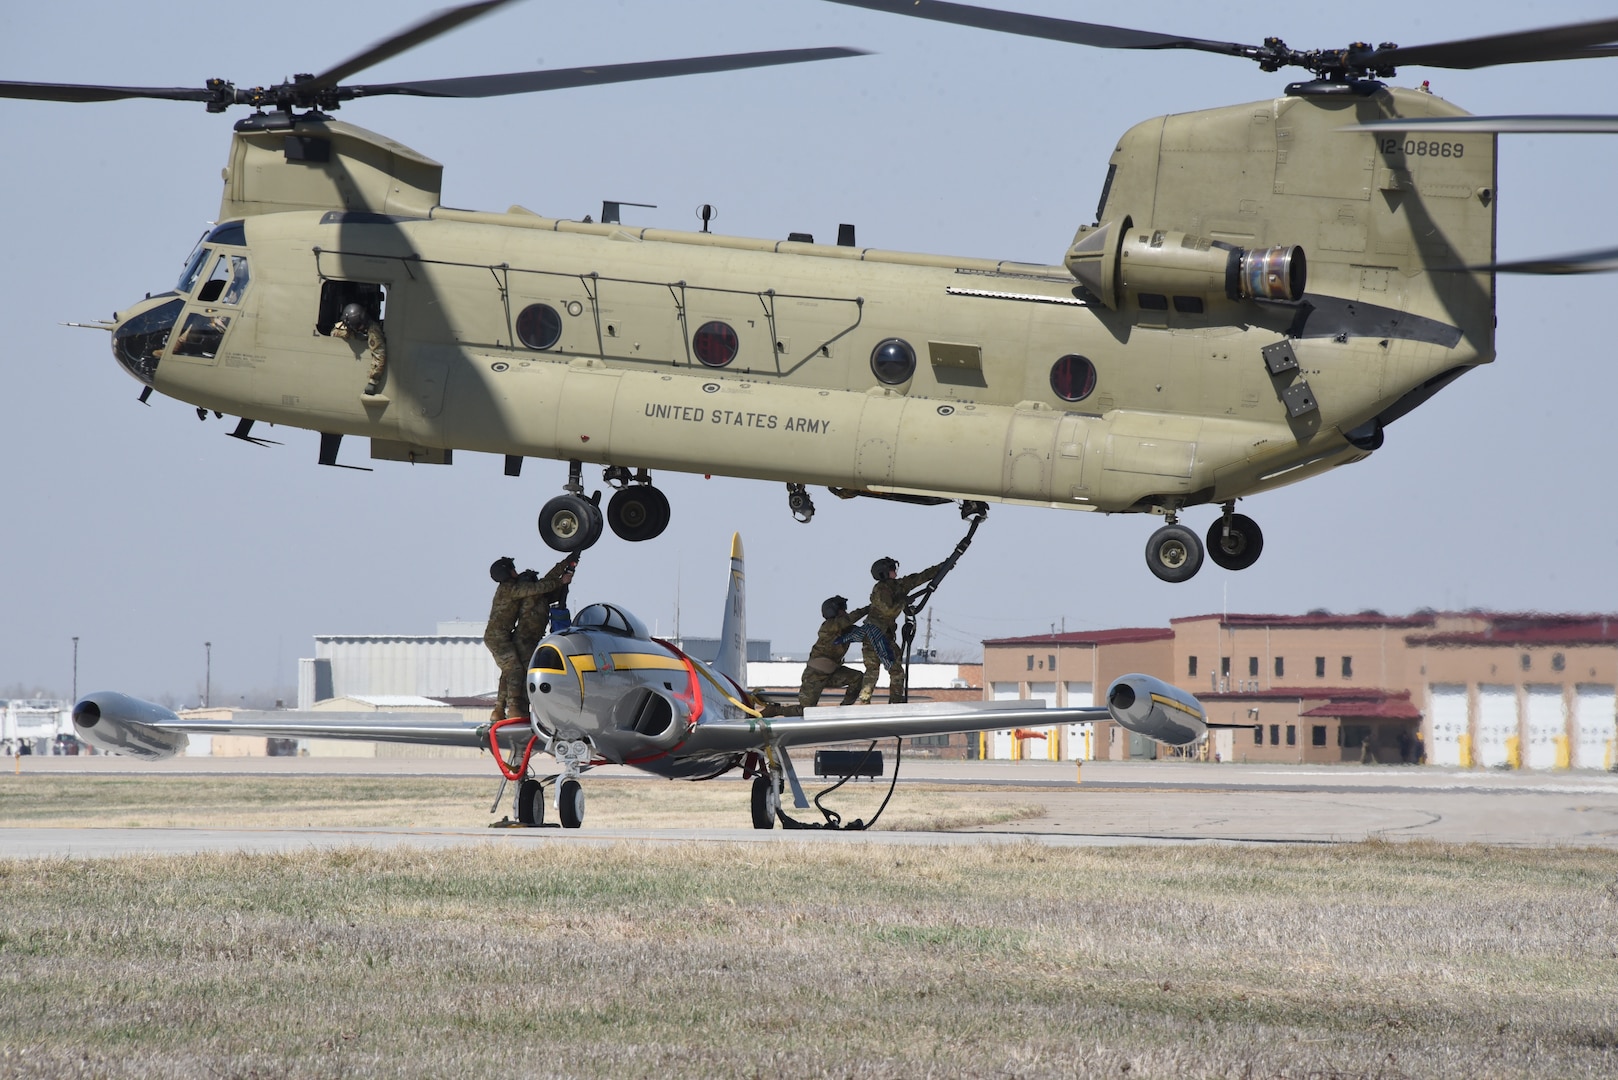 An Iowa Army National Guard CH-47 Chinook helicopter picks up a historic F-80 fighter jet from the Air National Guard paint facility in Sioux City, Iowa, April 11, 2023. The helicopter from the Iowa National Guard B/171 Aviation Regiment based in Davenport brought the jet back to Camp Dodge to be placed on static display.